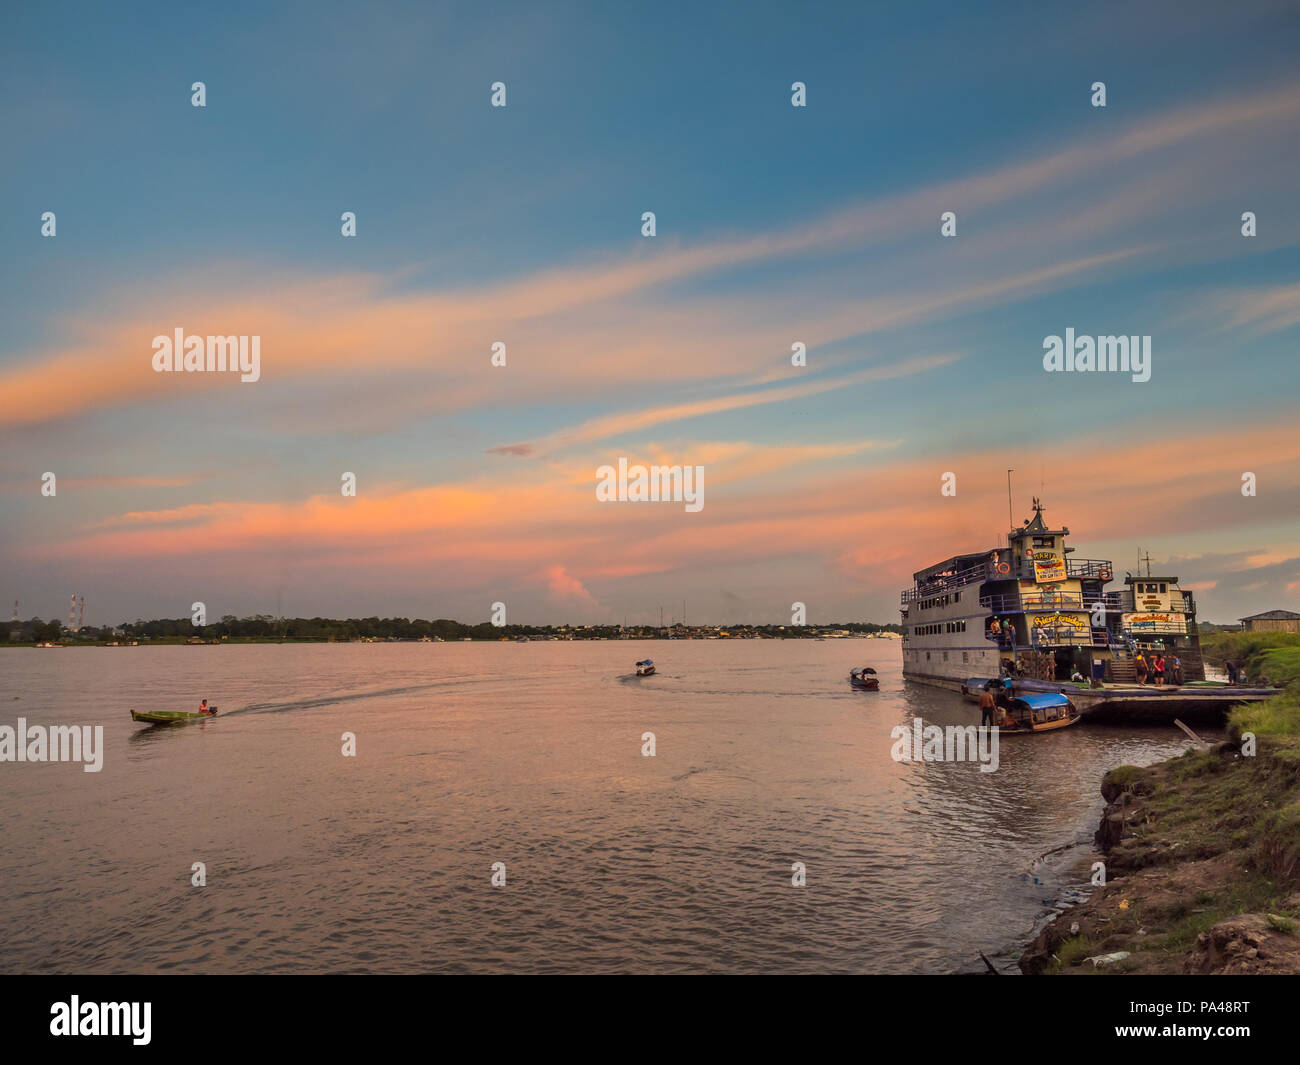 Santa Rosa, Peru - Mar 24, 2018: Sunset over the Amazon river and the cargo boat waiting at the port. Stock Photo